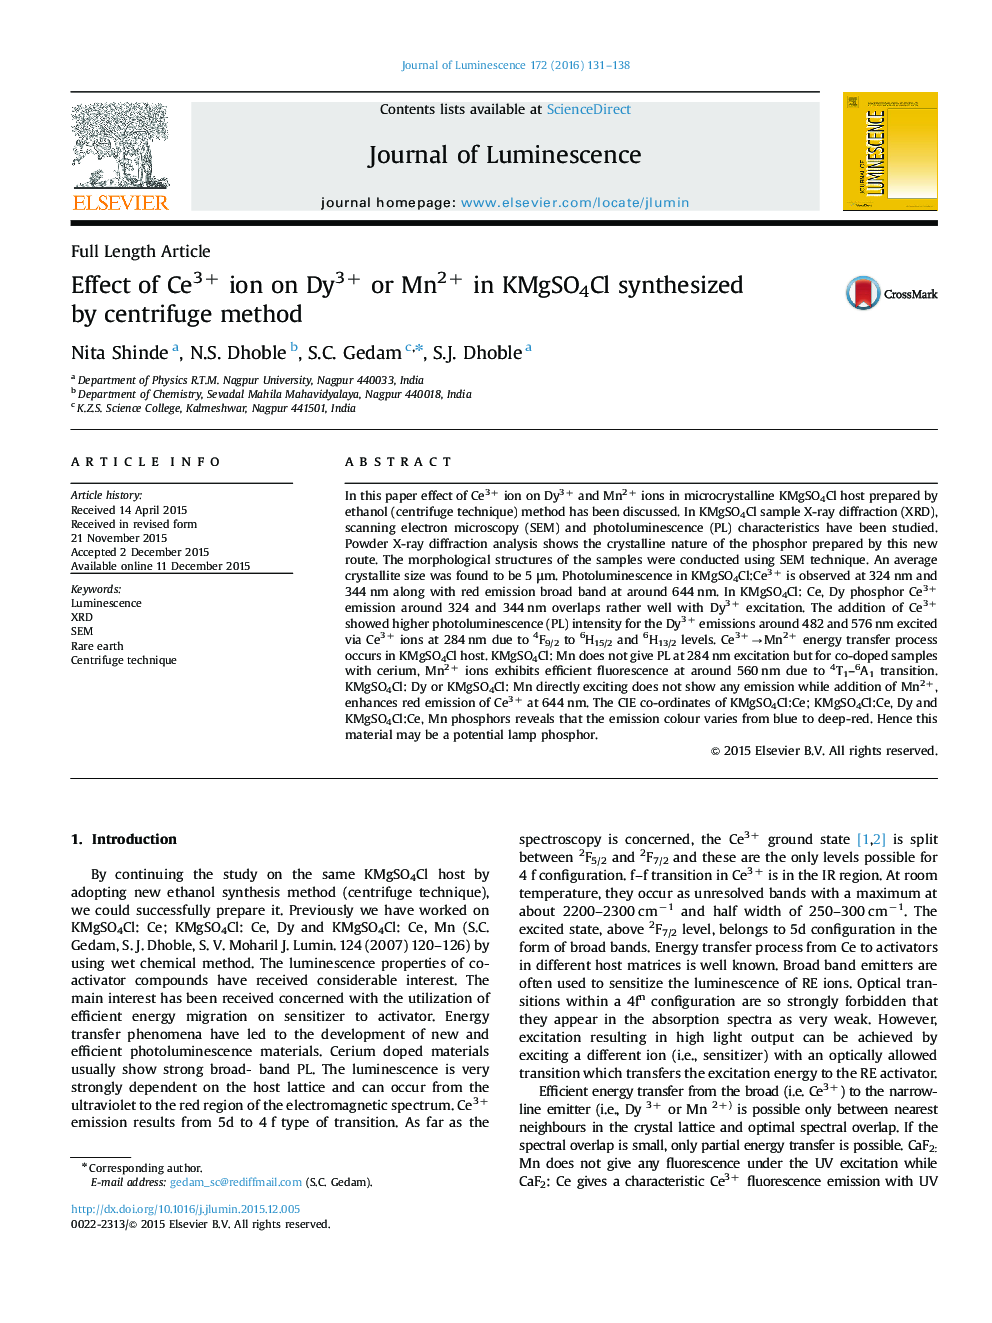 Effect of Ce3+ ion on Dy3+ or Mn2+ in KMgSO4Cl synthesized by centrifuge method